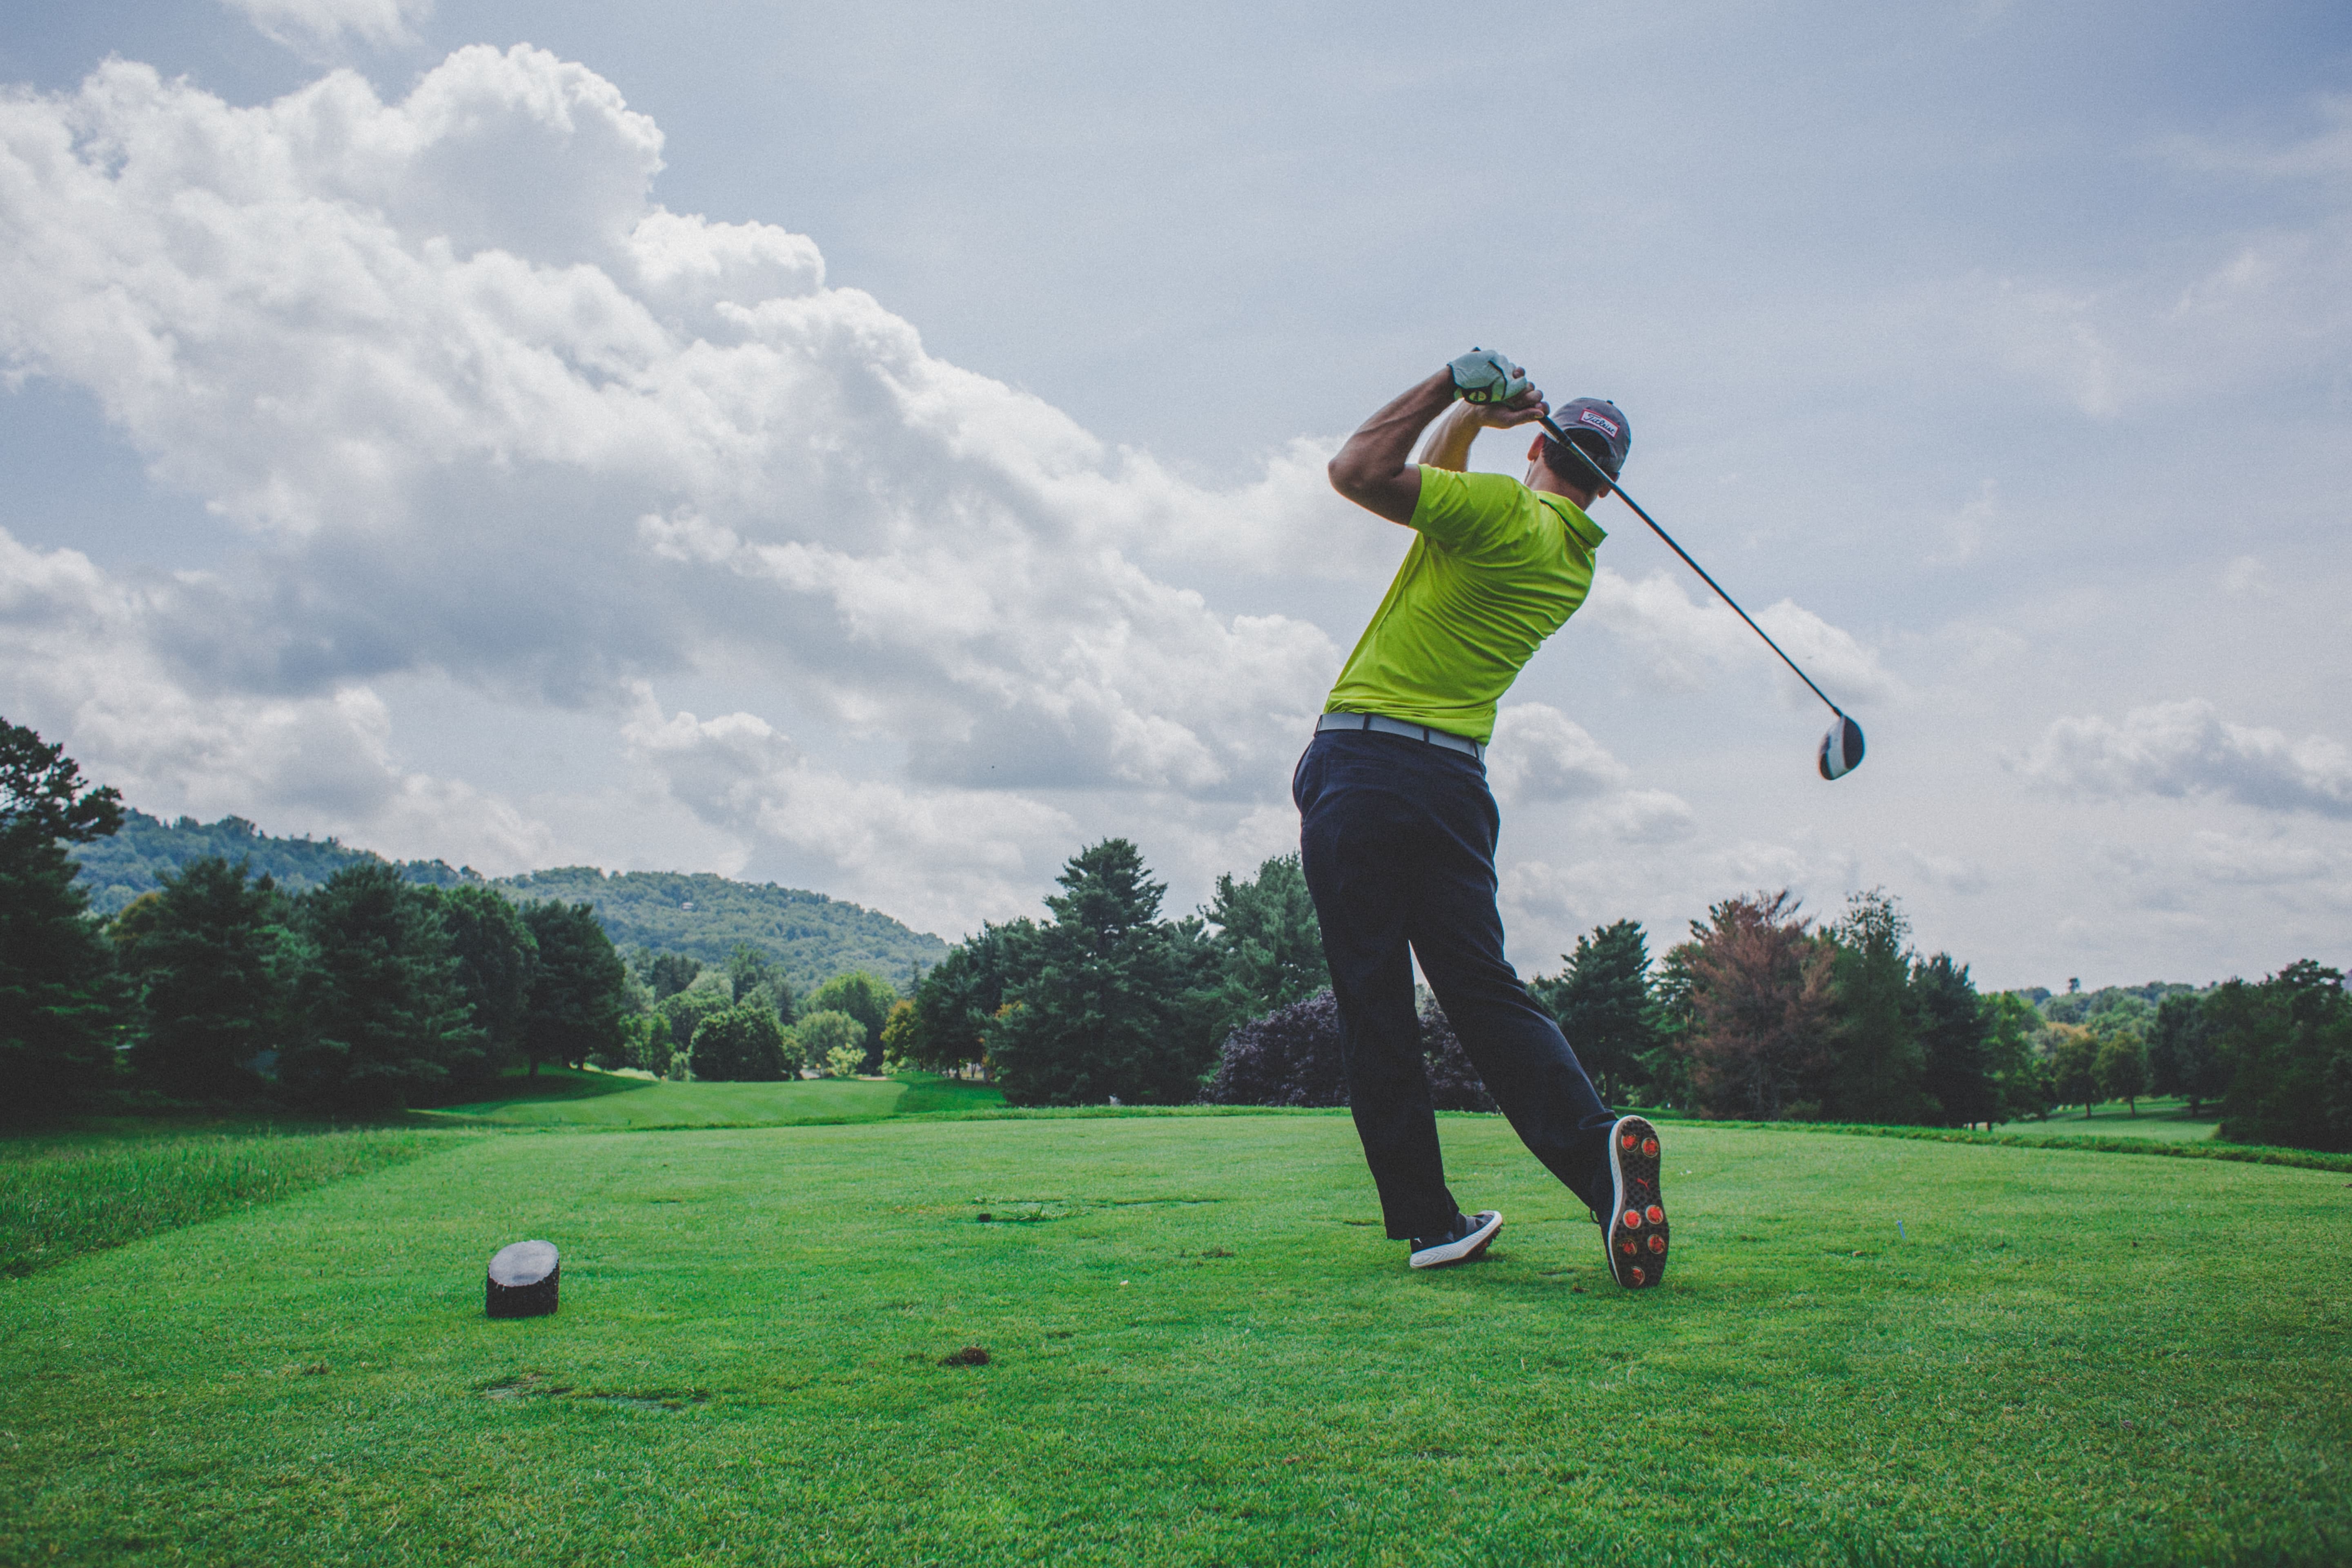 Award-winning golf academy provides private and group instruction for beginners, advanced, and PGA players.